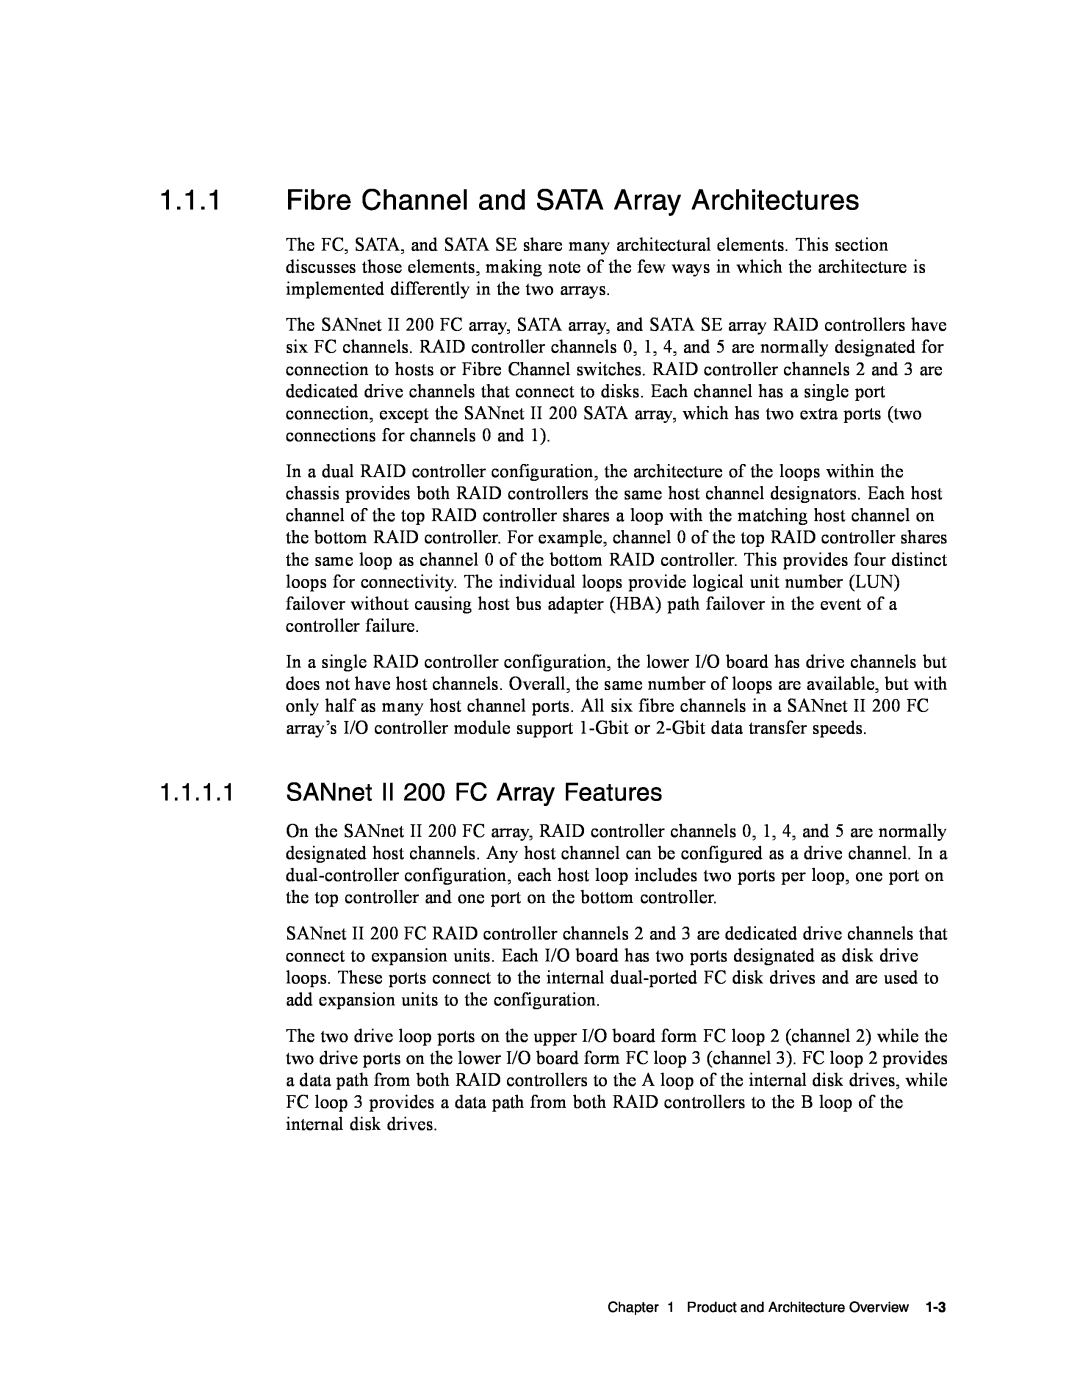 Dot Hill Systems service manual Fibre Channel and SATA Array Architectures, SANnet II 200 FC Array Features 